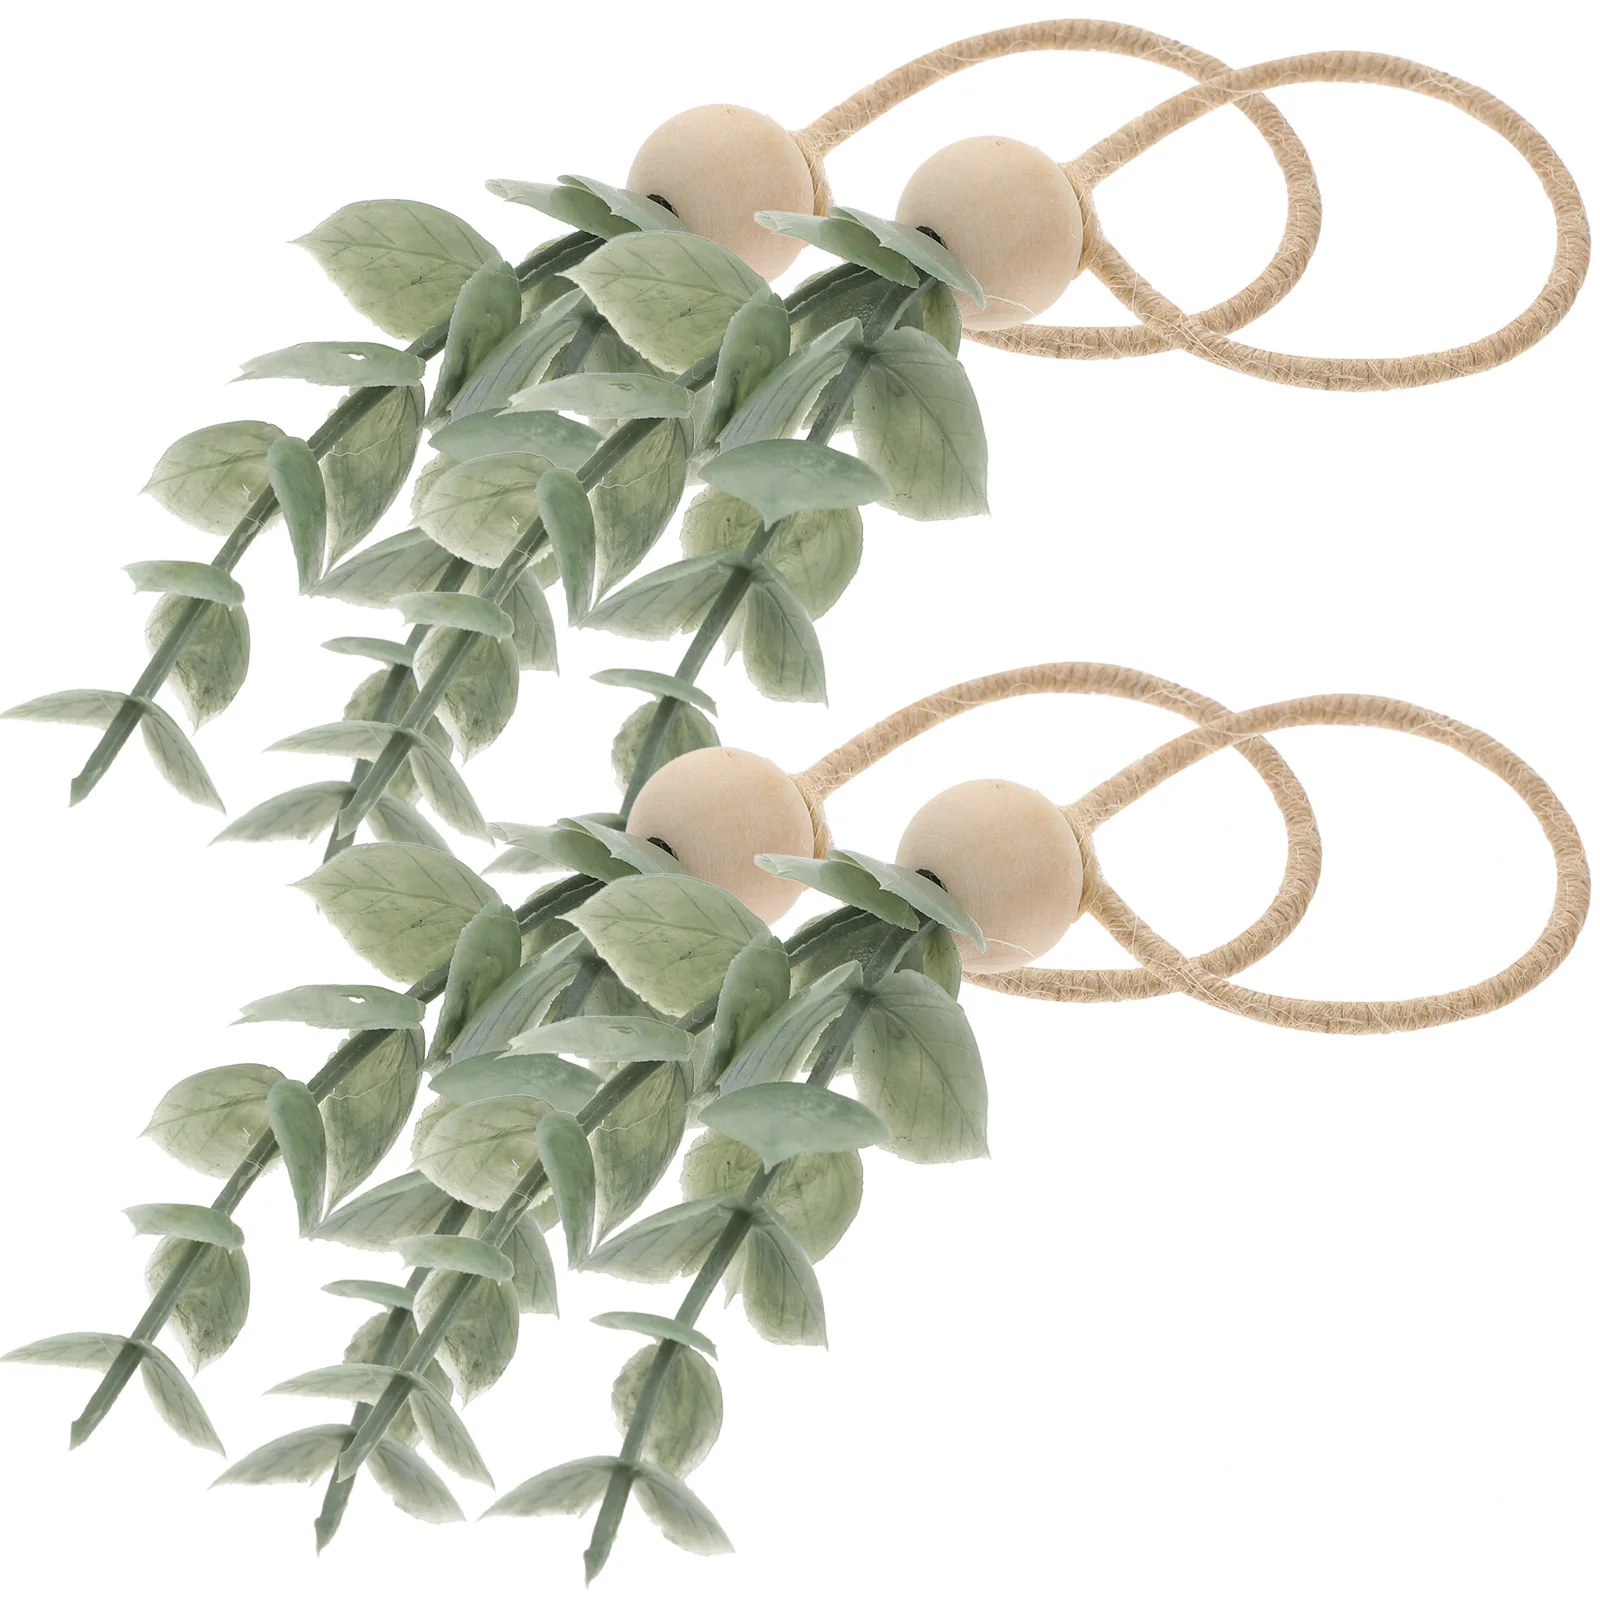 

Napkin Rings Holders Easter Eucalyptus Wooden Beads Leaf Greenery Farmhouse Spring Rustic Decorative Serviette Buckles